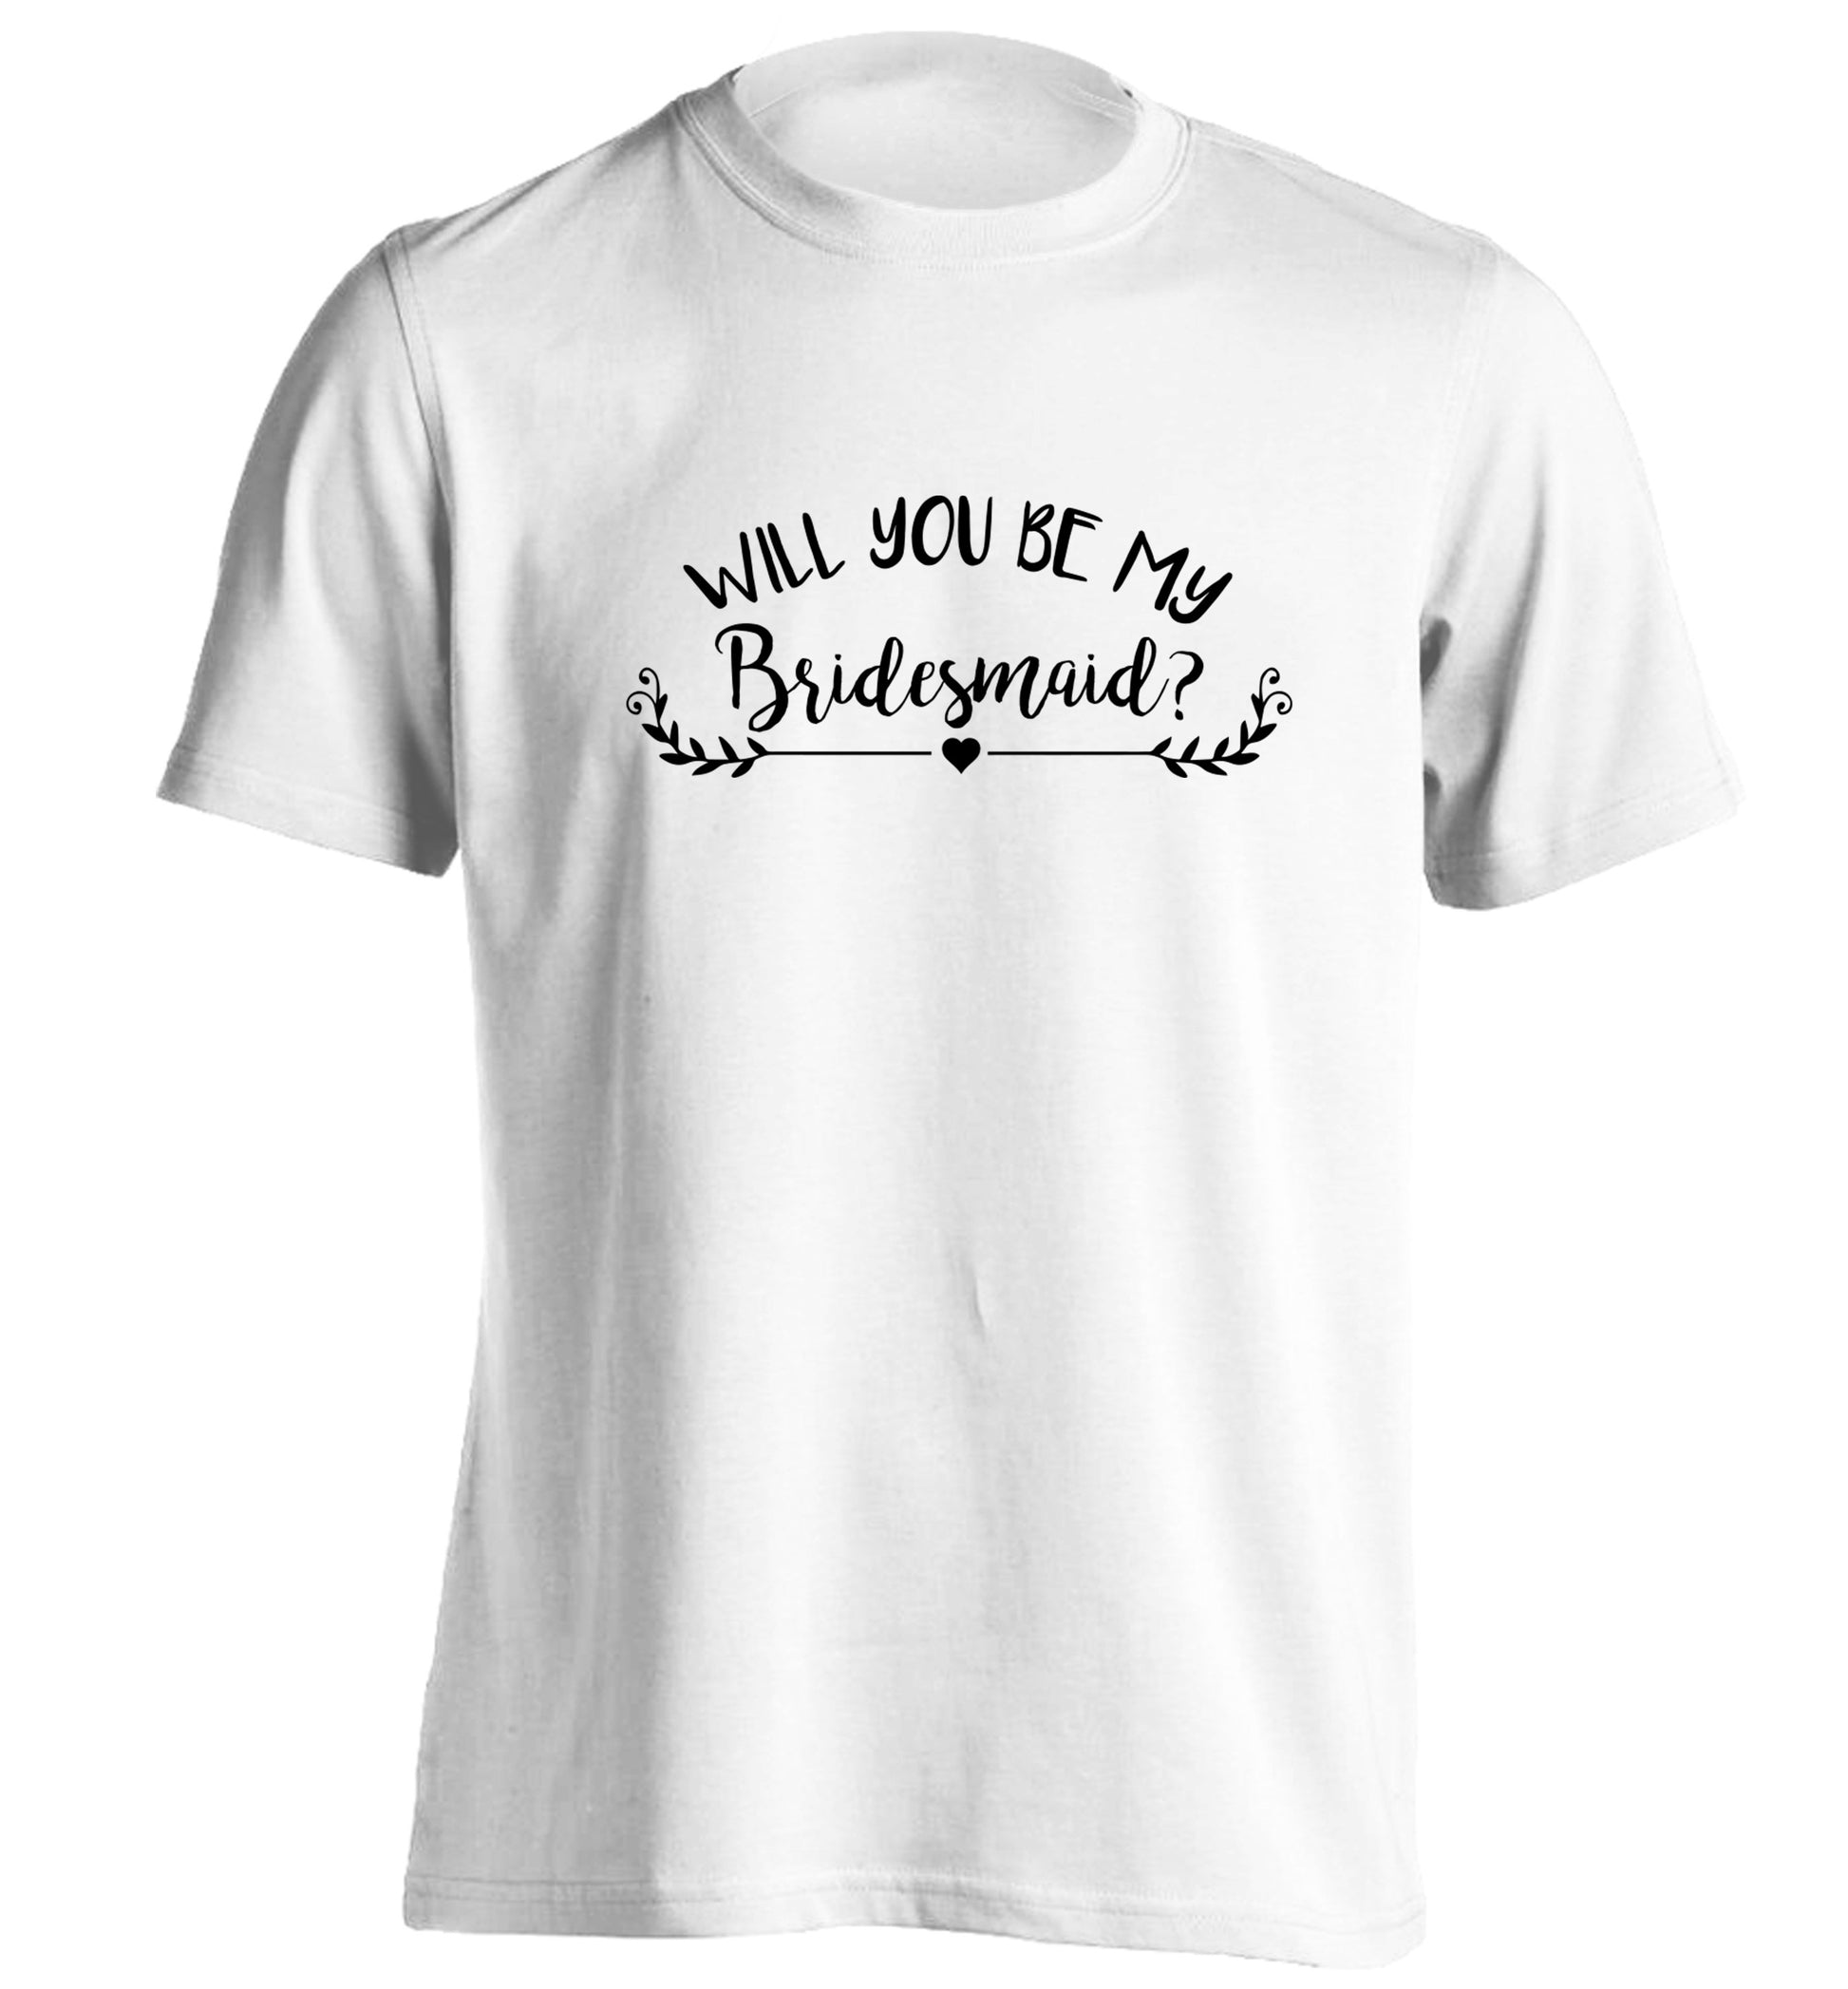 Will you be my bridesmaid? adults unisex white Tshirt 2XL